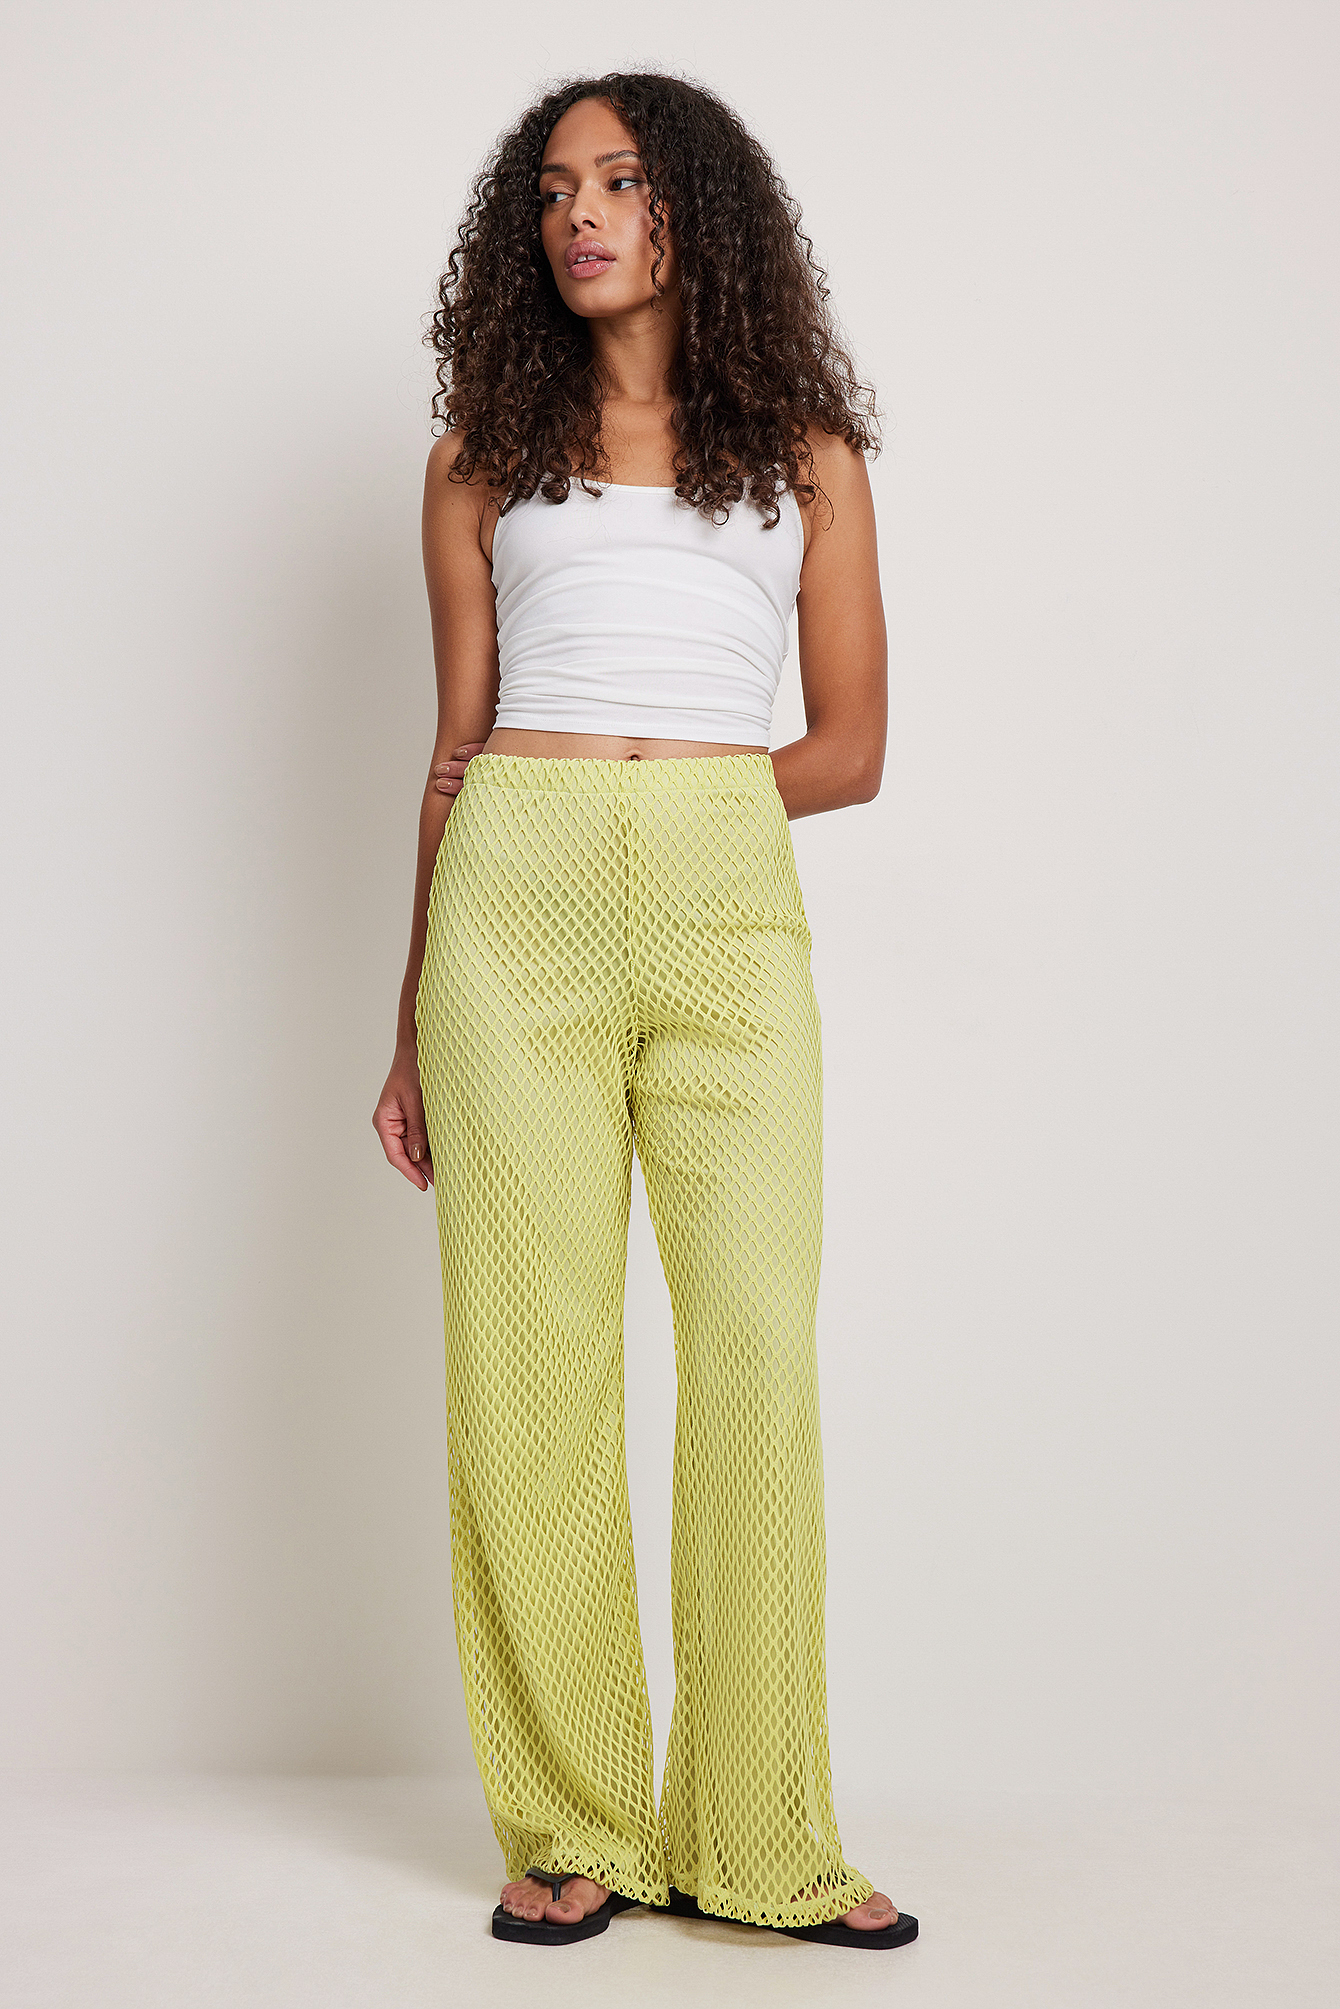 Flare Net Trousers Outfit